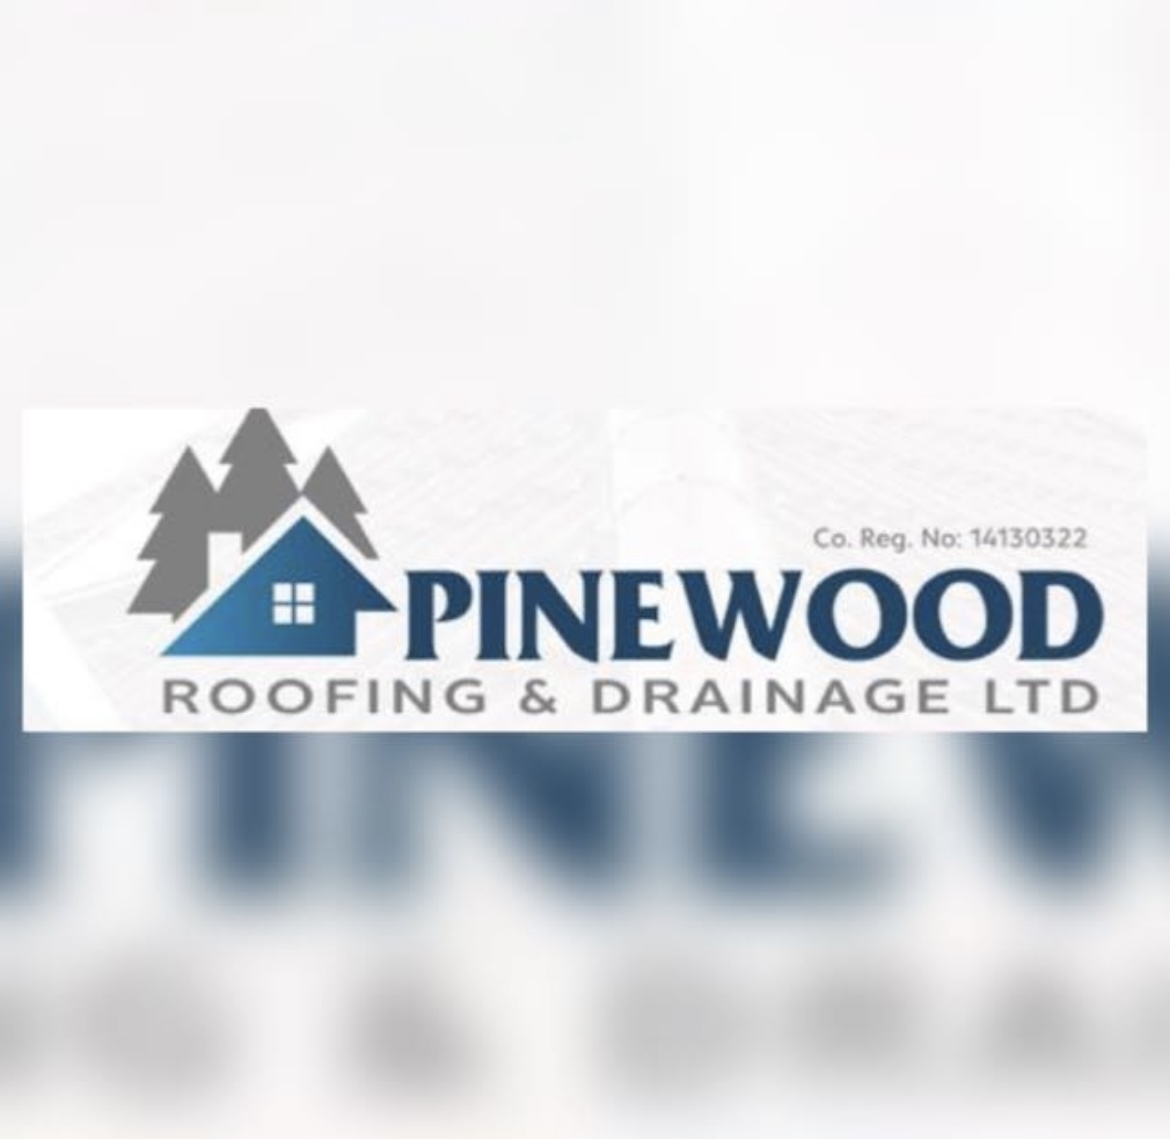 Pinewood roofing and drainage LTD